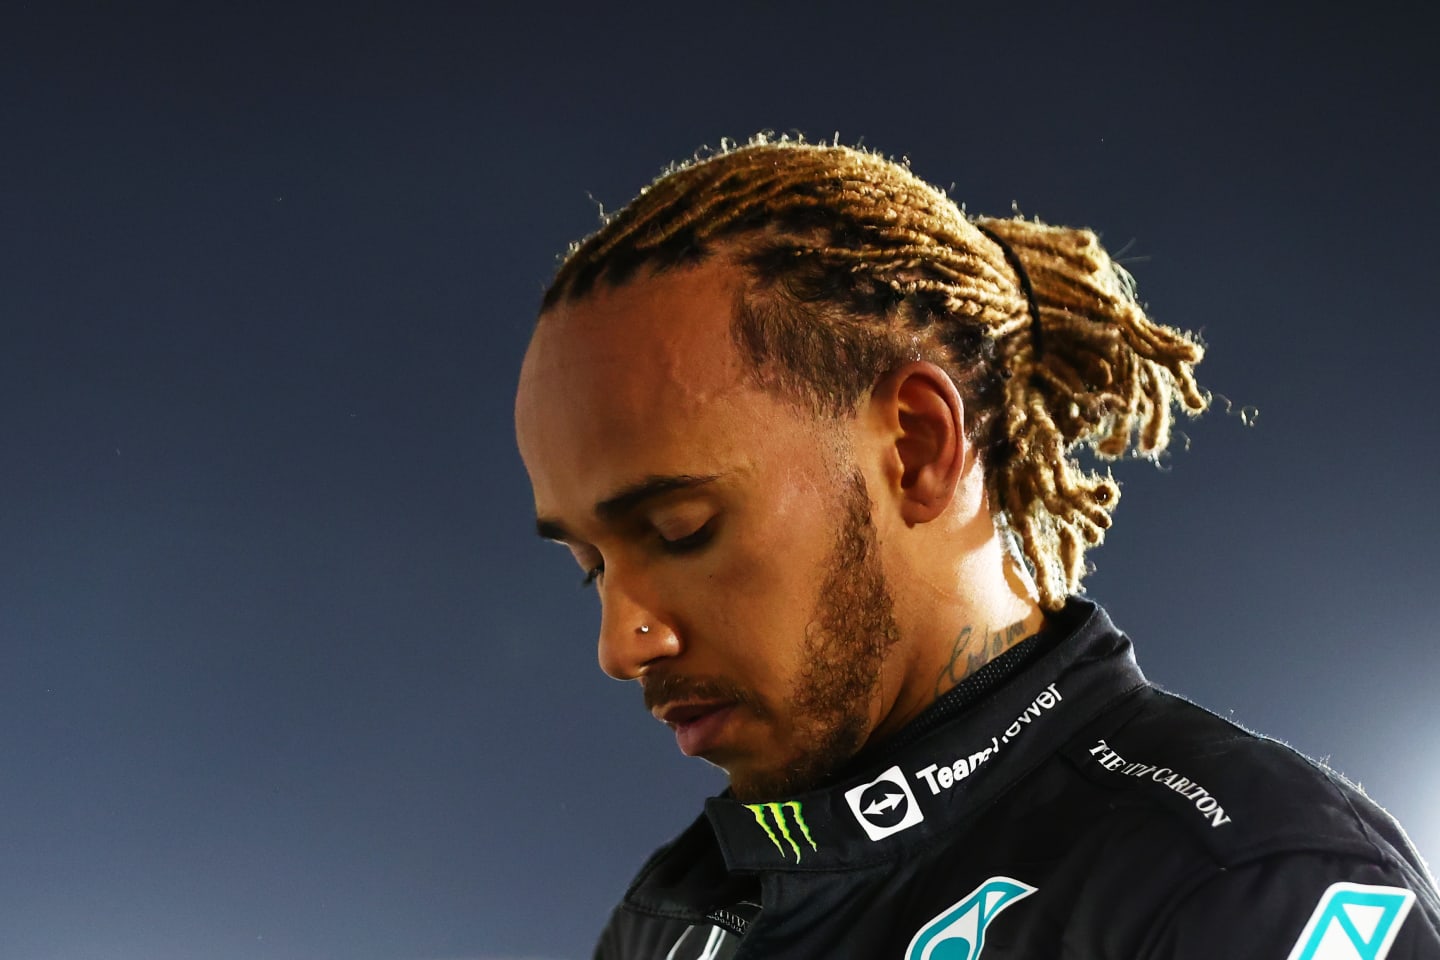 BAHRAIN, BAHRAIN - MARCH 20: Third placed Lewis Hamilton of Great Britain and Mercedes looks on in